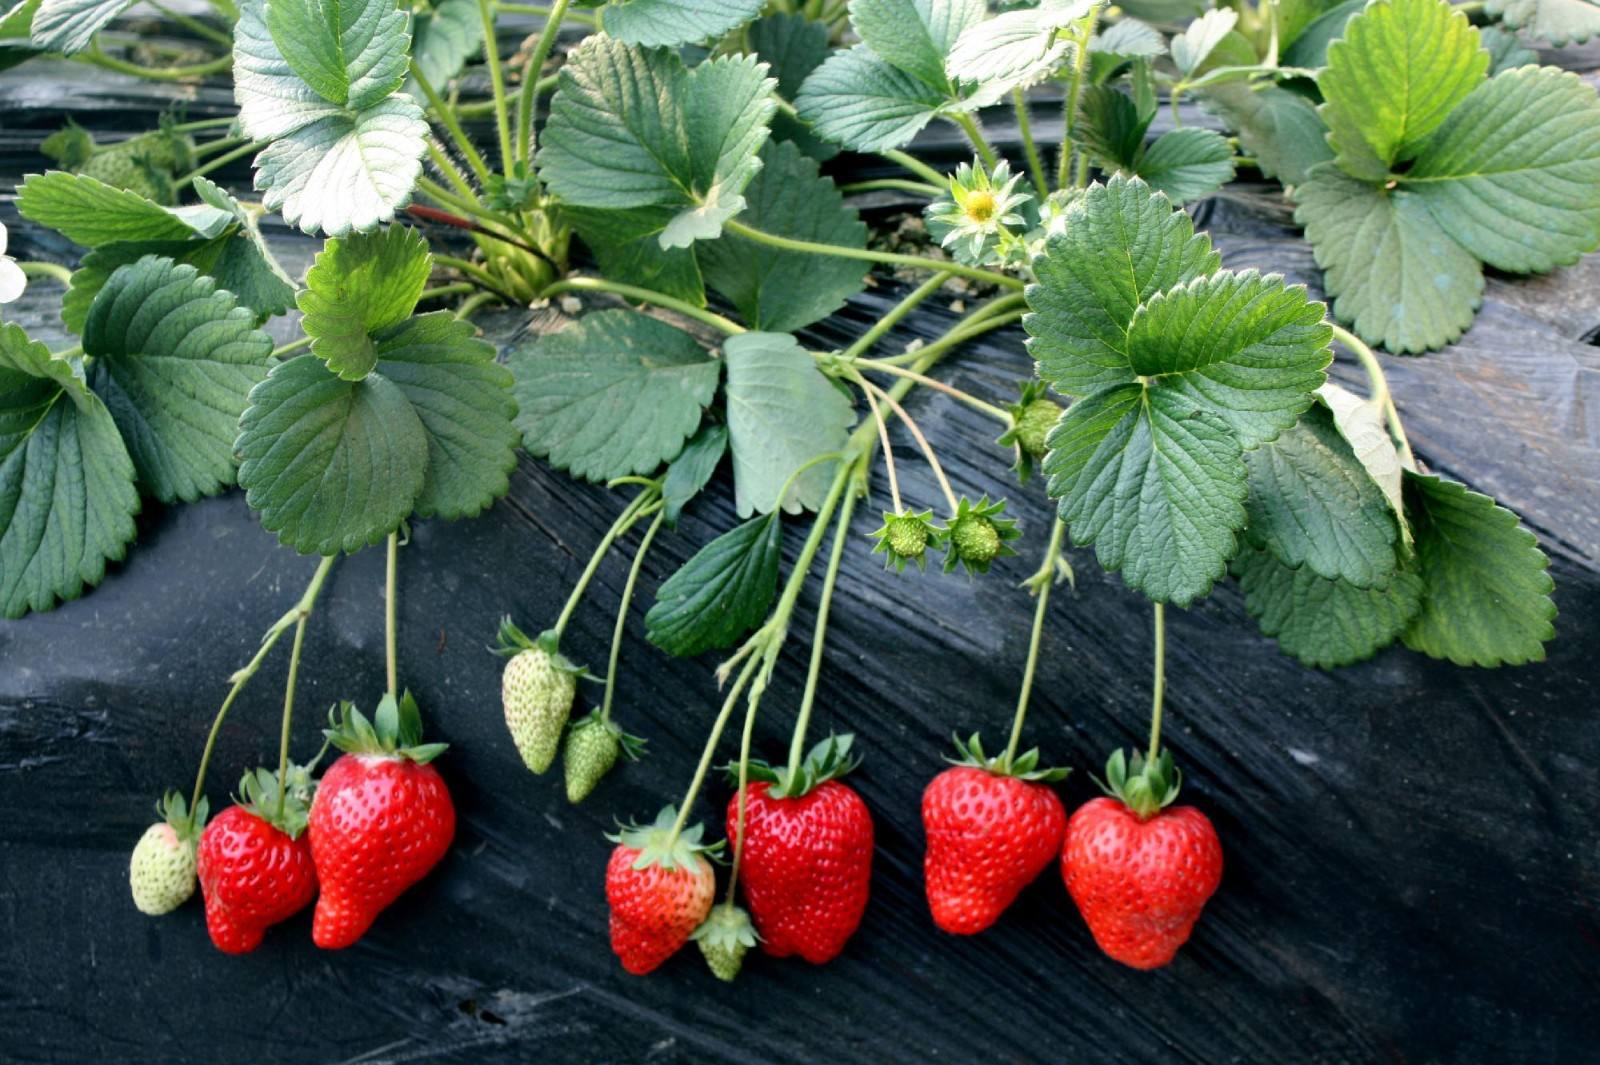 Strawberry irrigation, spray tube or drip tape, which is better?